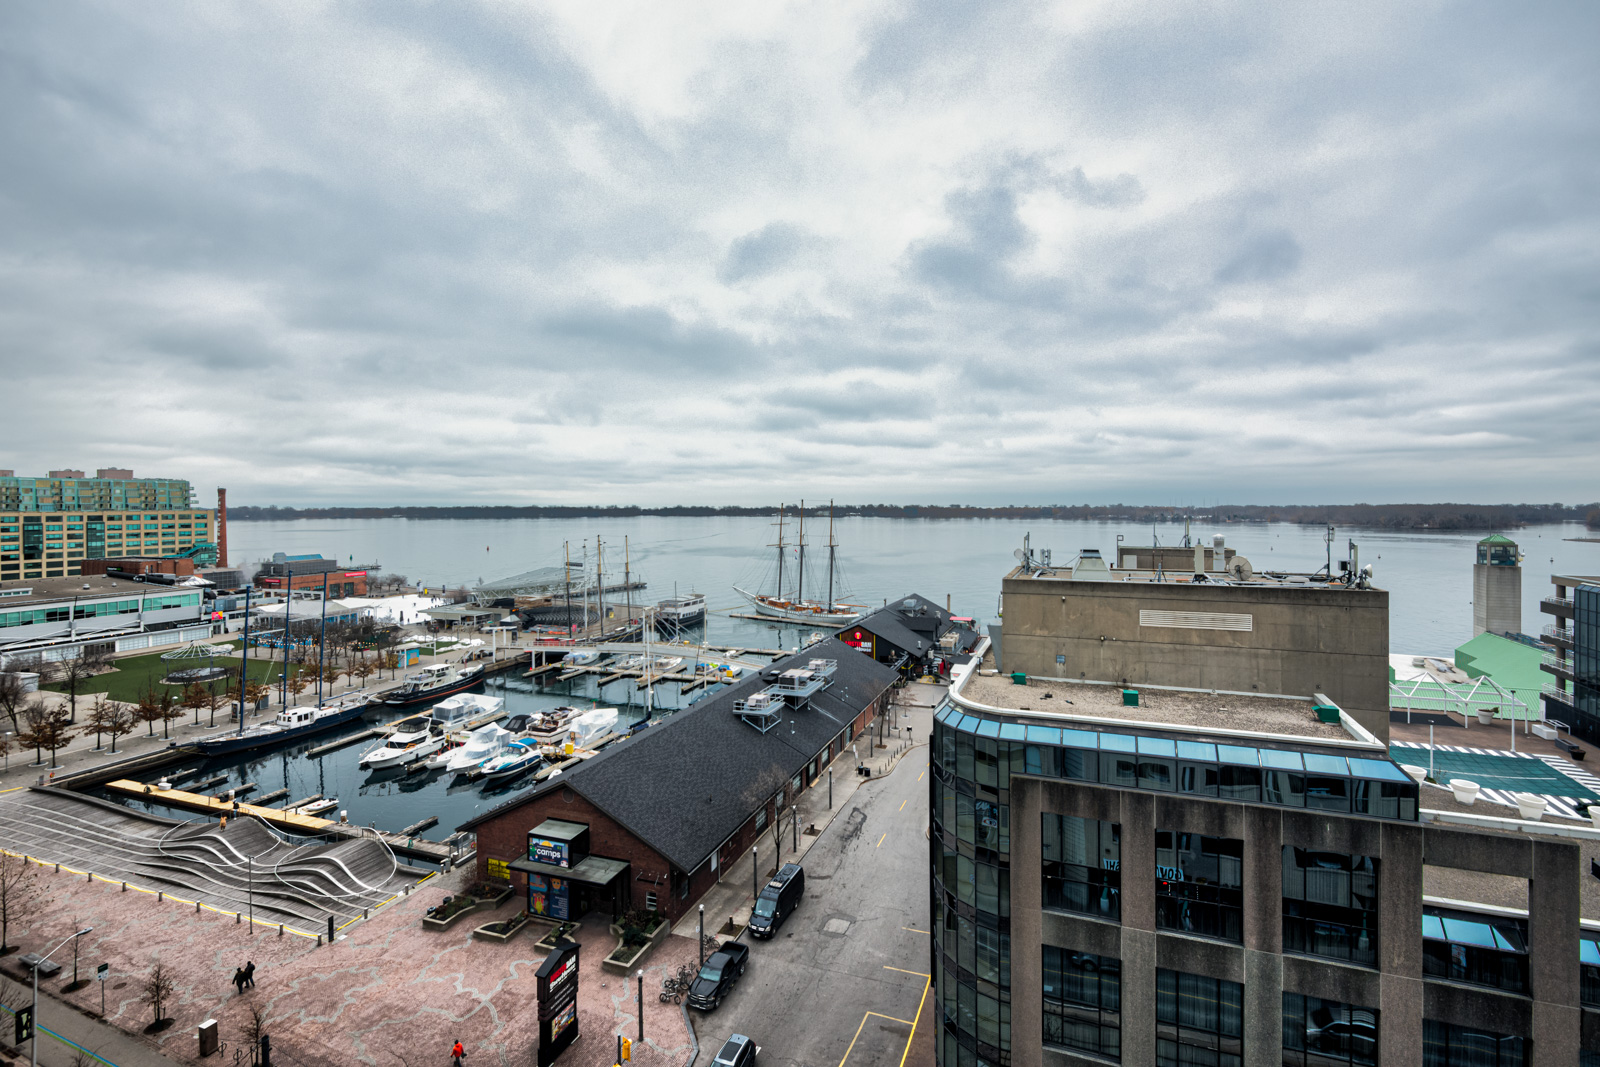 View of Toronto Waterfront, pier with boats, Lake Ontario and streets below Harbourfront II.